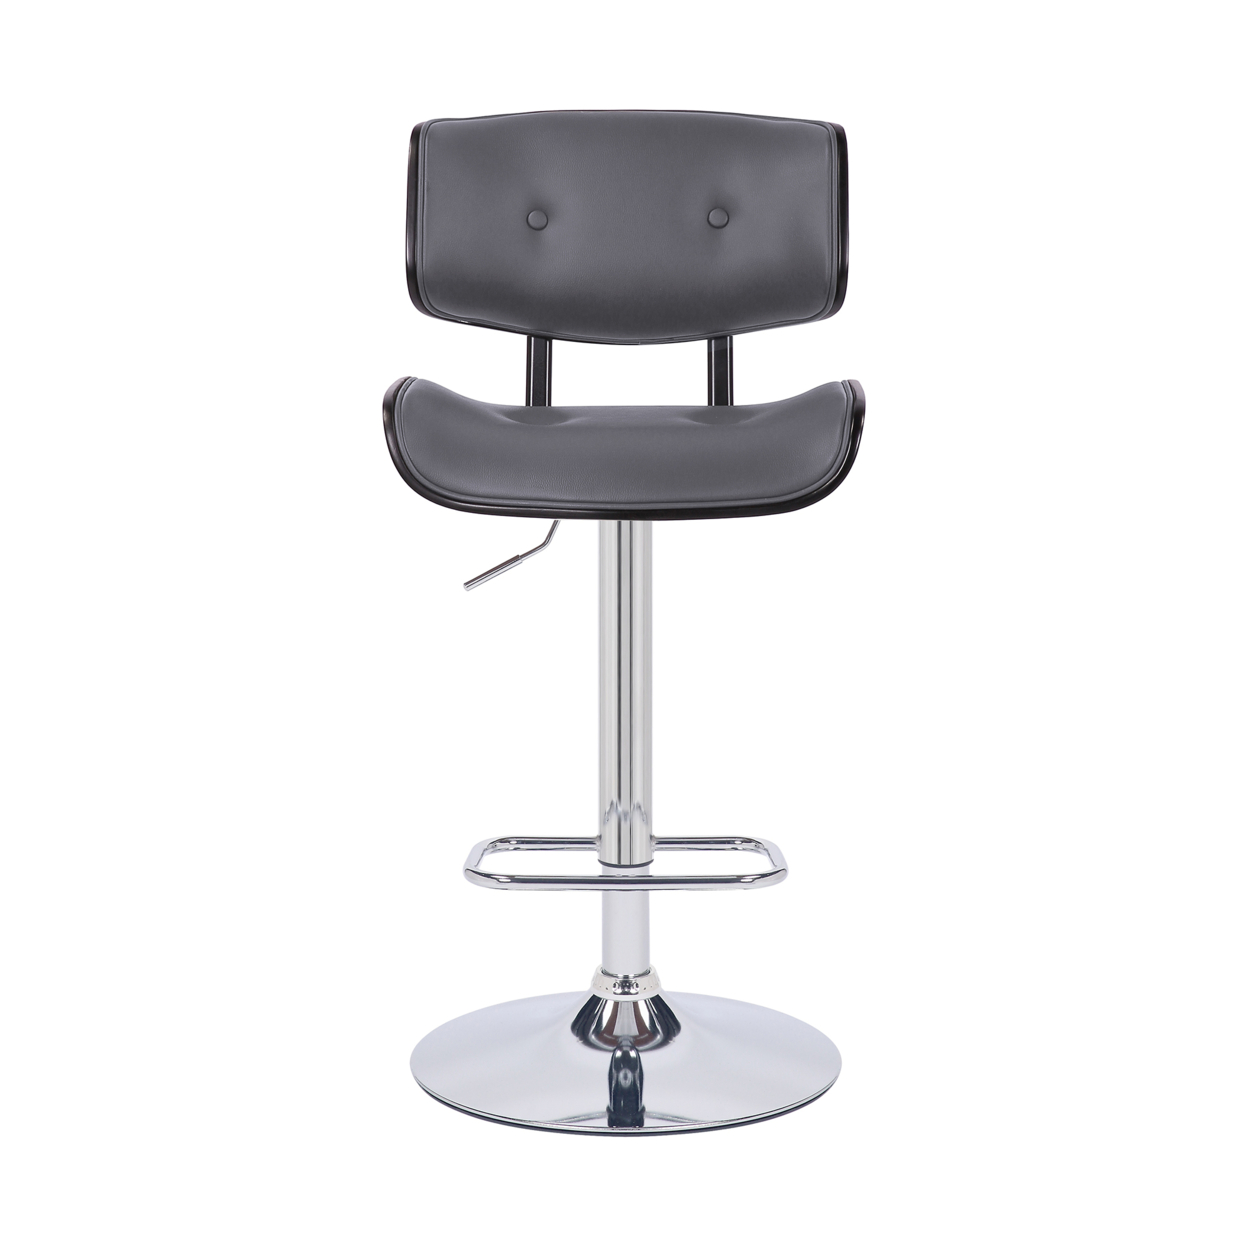 Bar Stool With Leatherette Button Tufted Back And Seat, Gray And Silver- Saltoro Sherpi